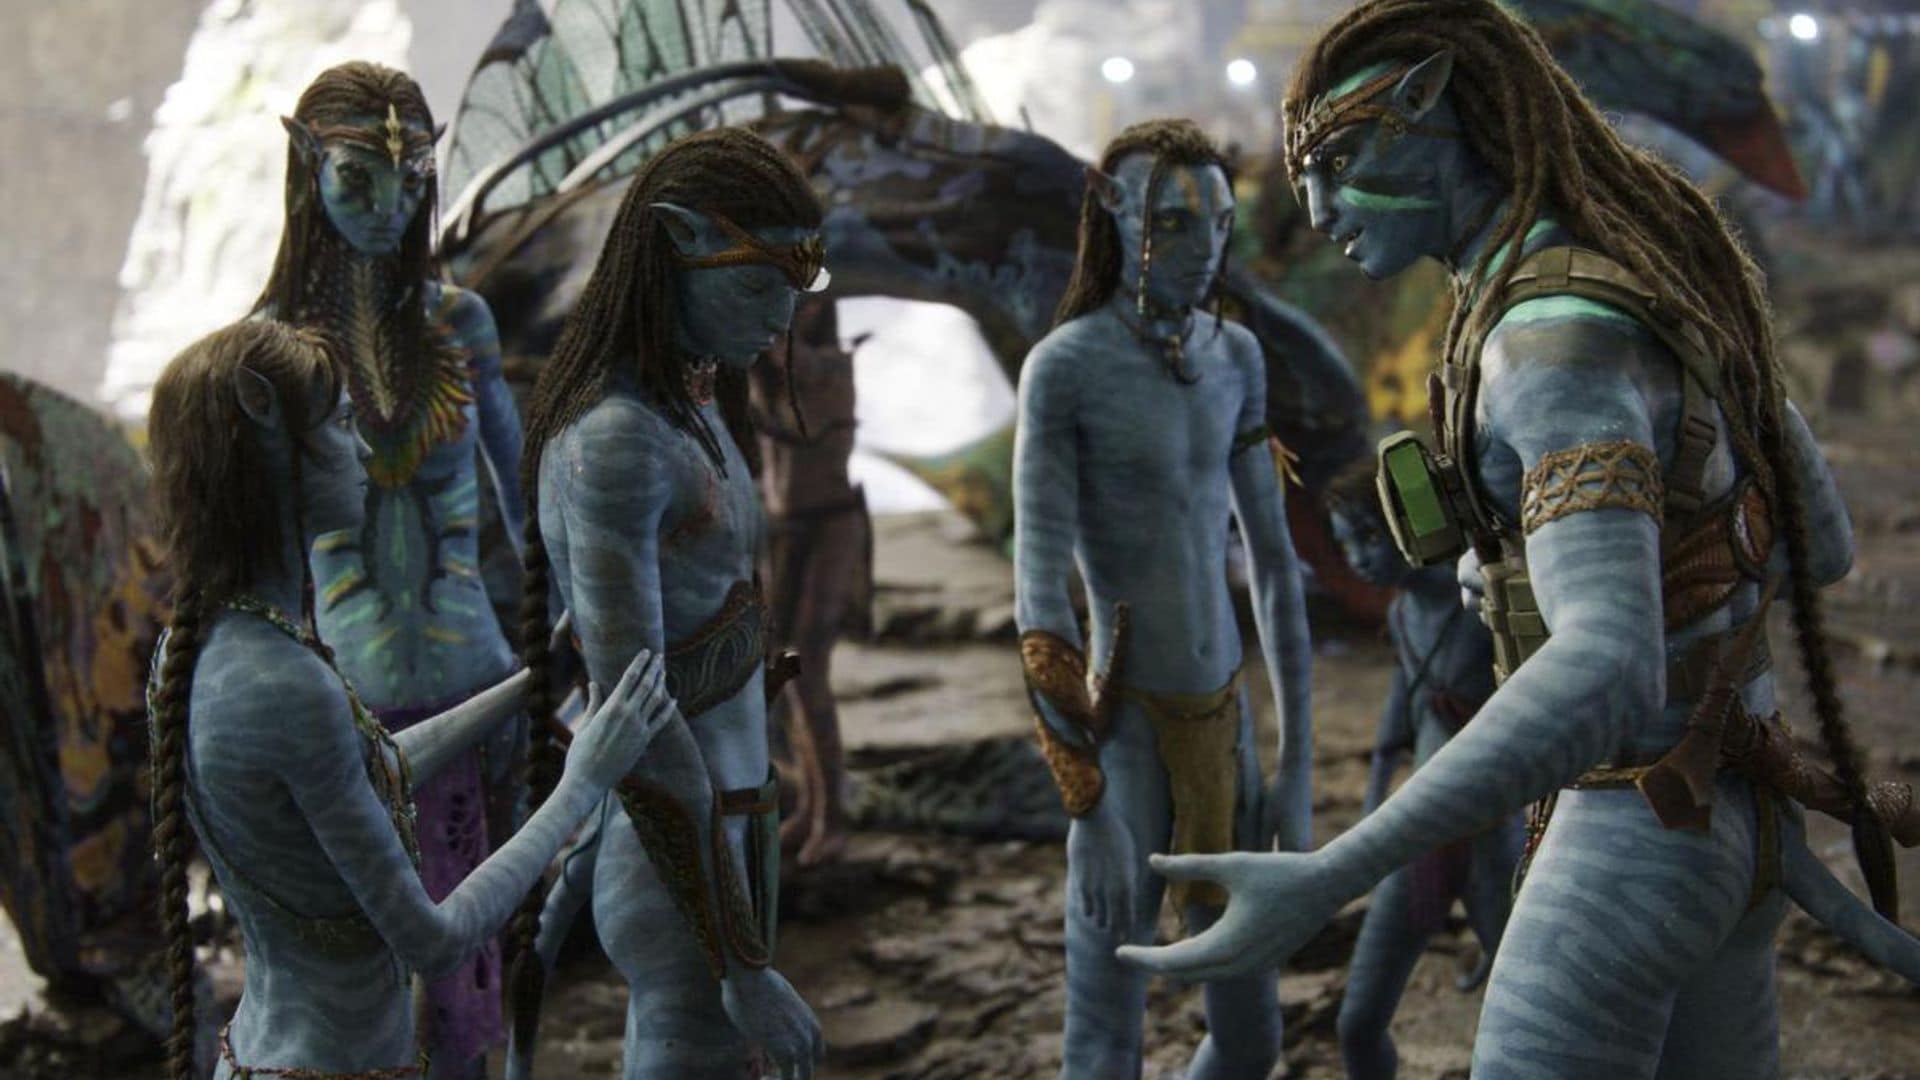 Check out Zoe Saldaña in the new trailer for ‘Avatar: The Way of Water’